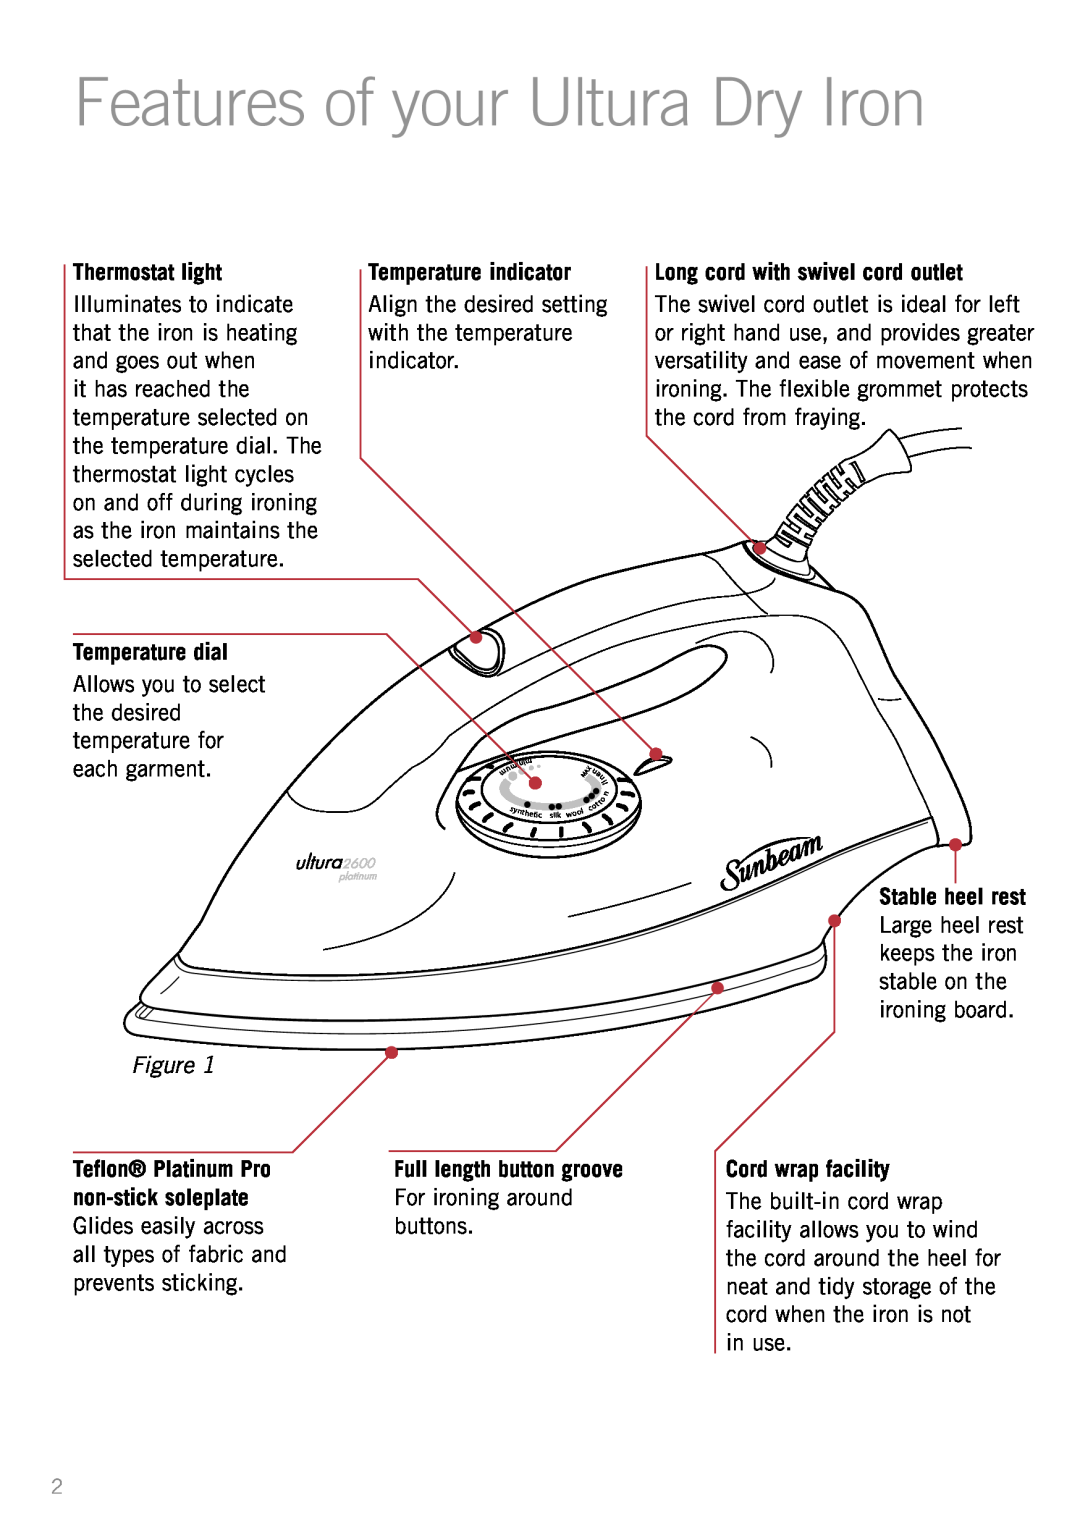 Sunbeam 2600 Features of your Ultura Dry Iron, Thermostat light, Temperature indicator, Long cord with swivel cord outlet 